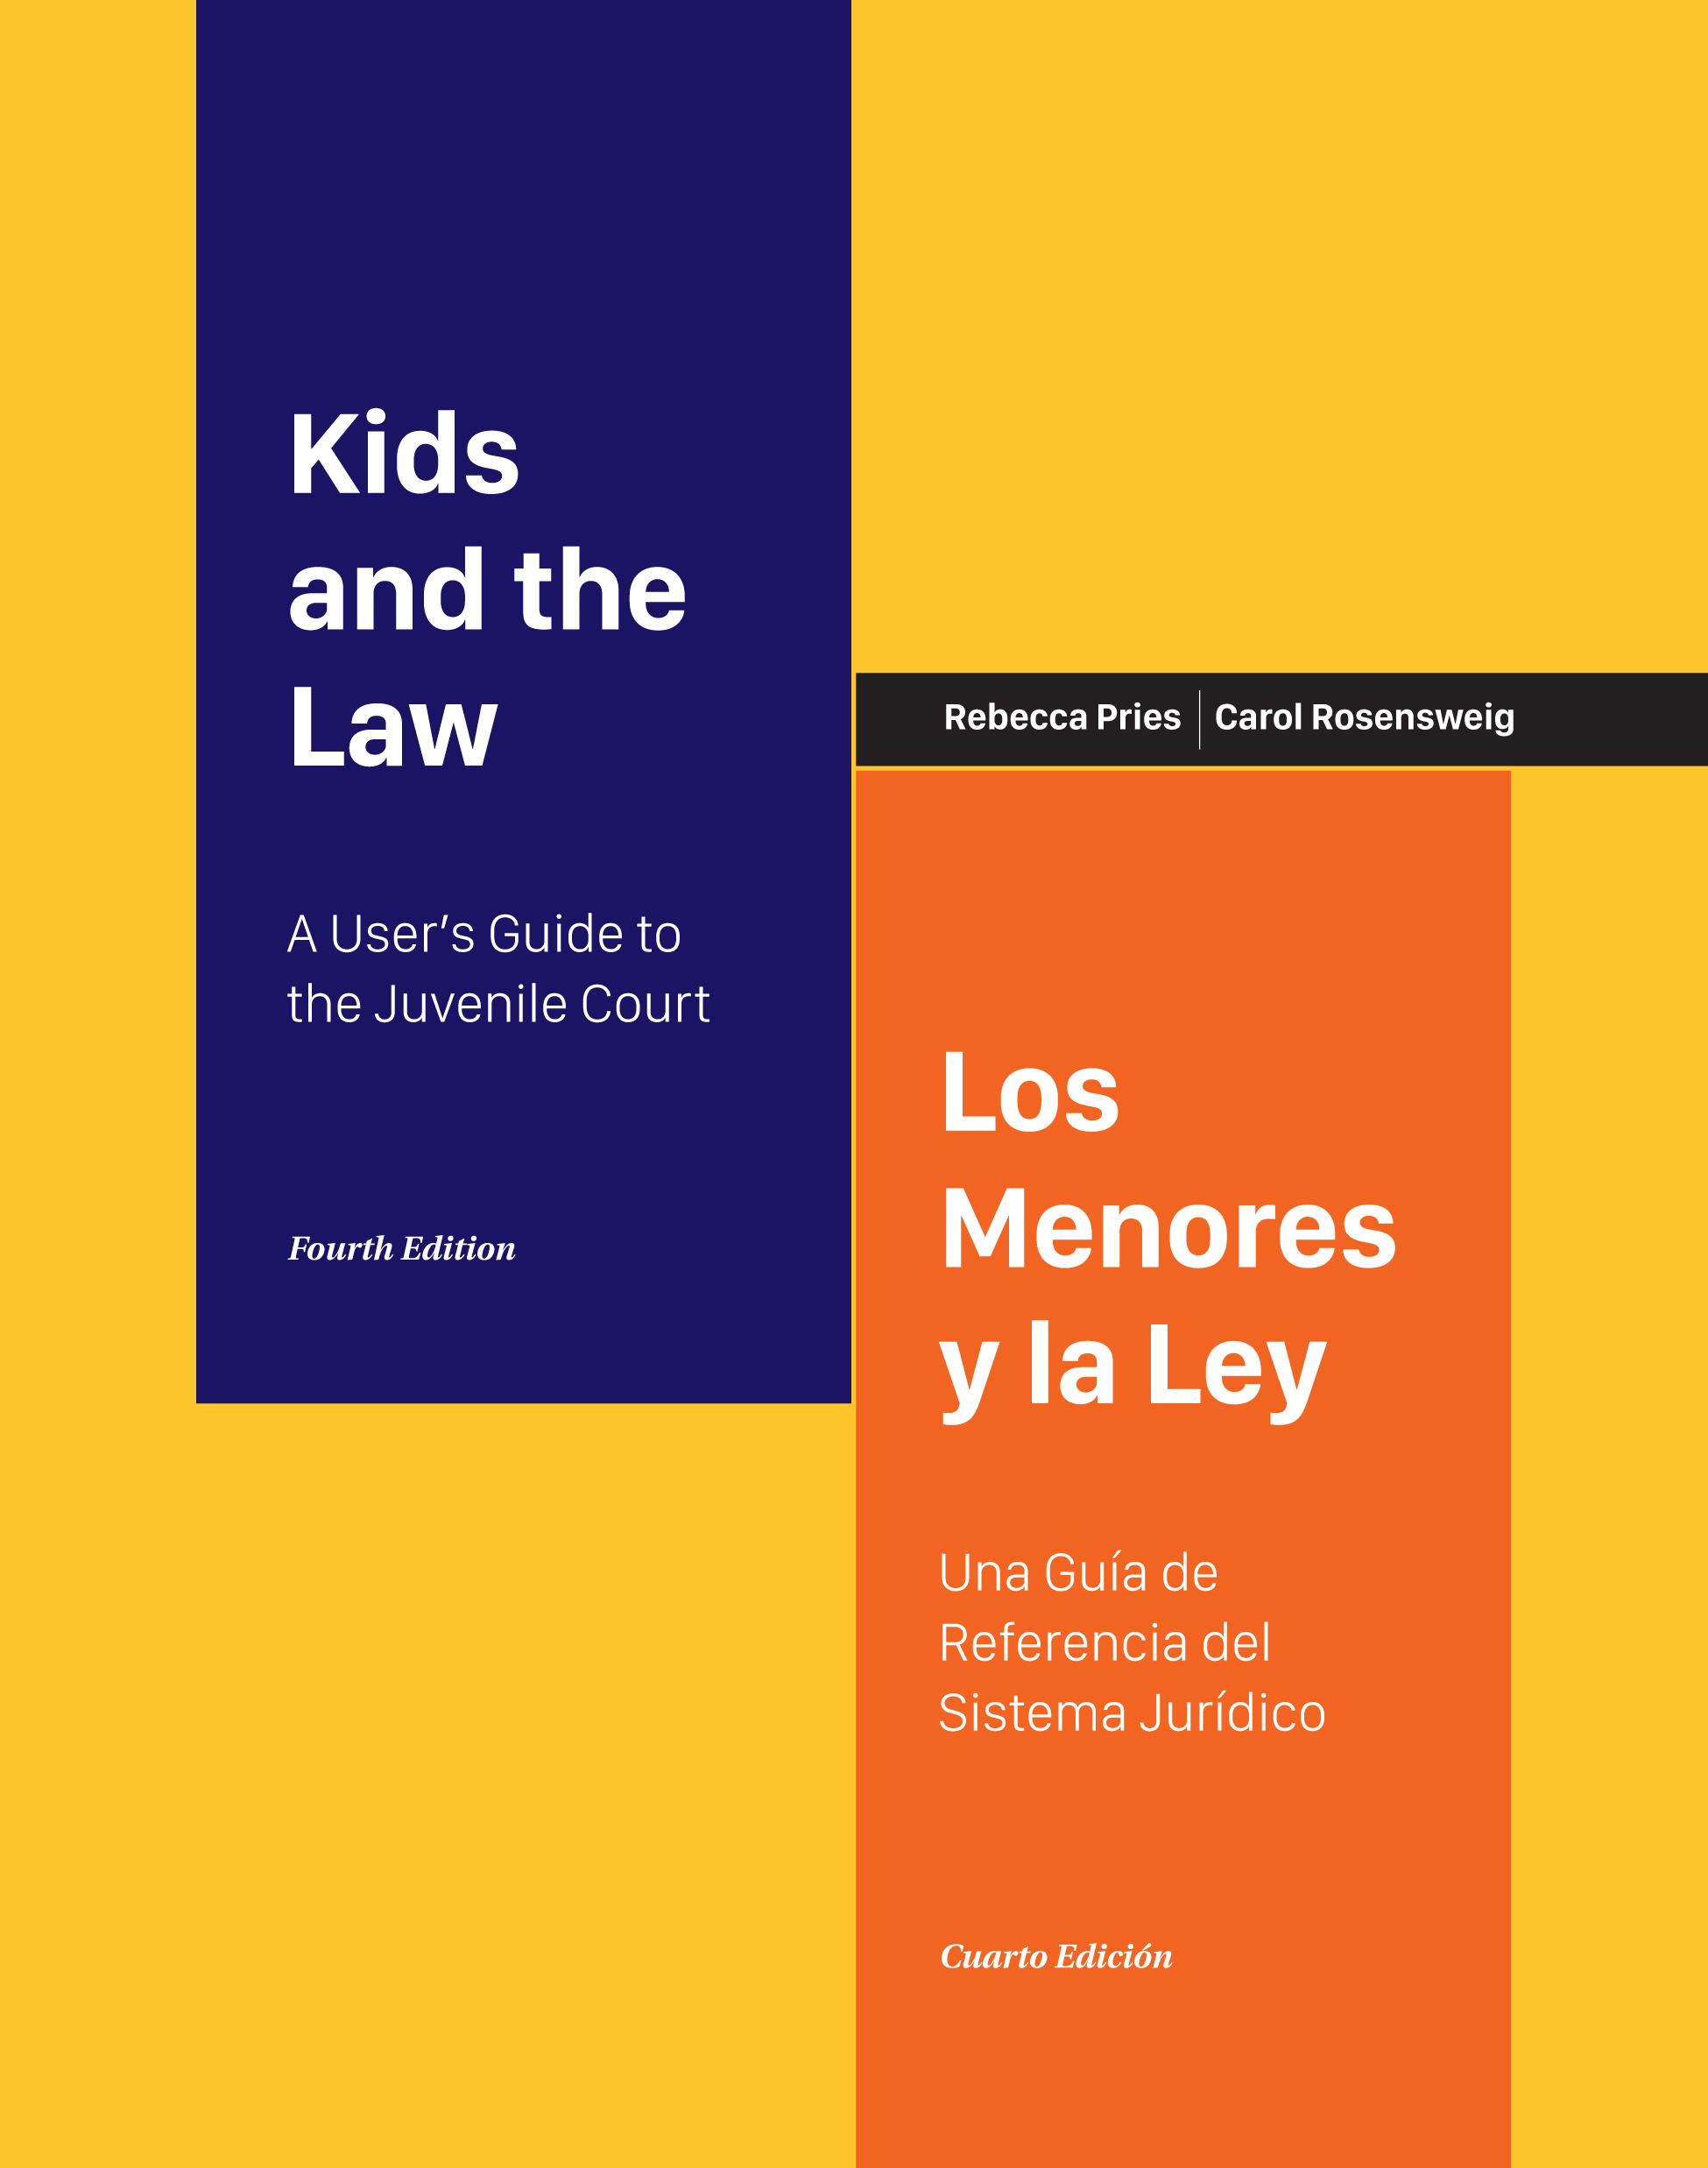 book cover is yellow rectangle with blue and orange blocks. Text reads Kids and the Law.